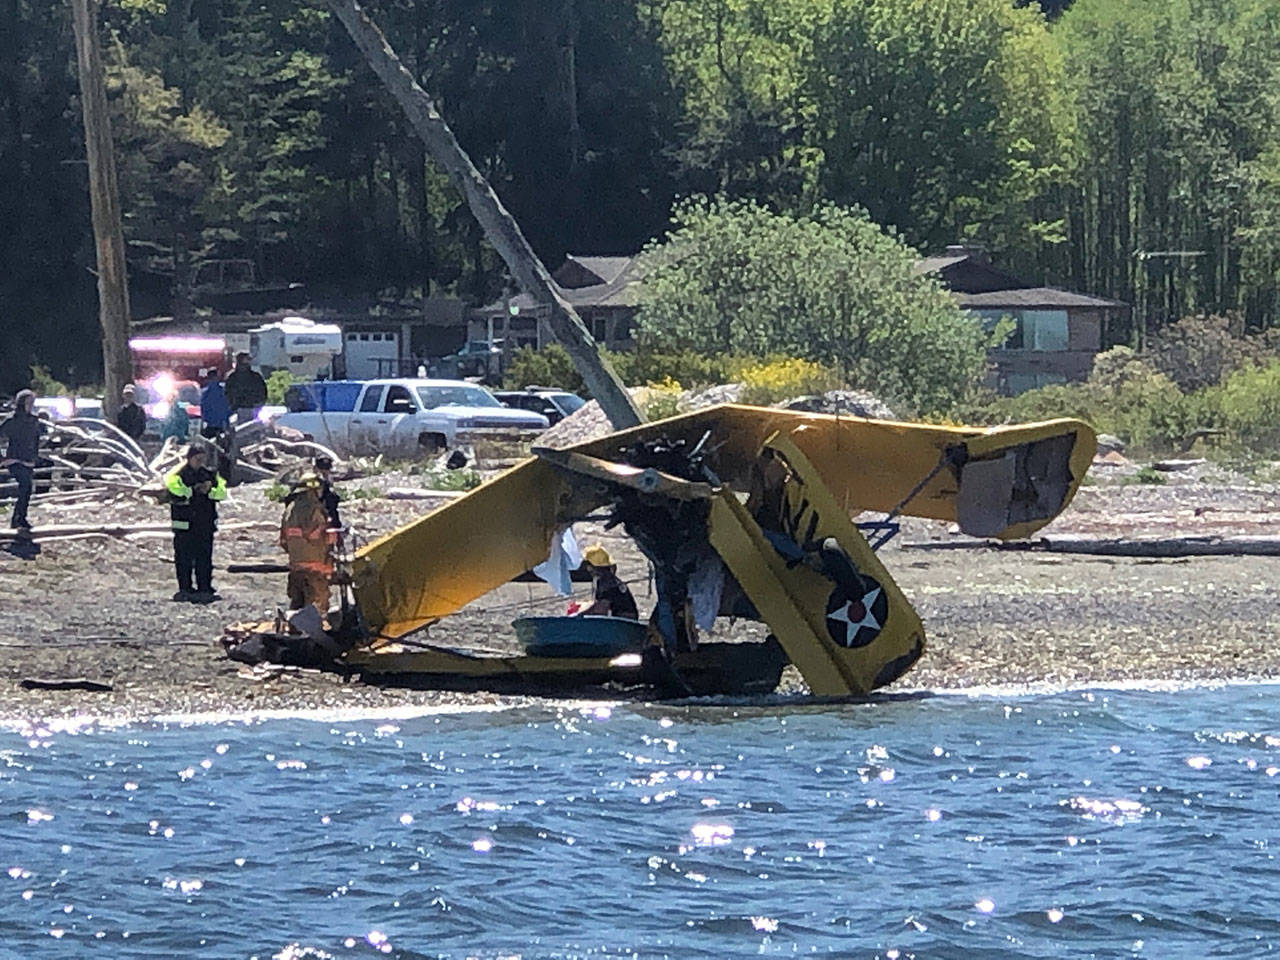 Neil Morrison and Eric Taylor were injured when this plane crashed on a Discovery Bay beach on Sunday. (East Jefferson Fire-Rescue Marine Unit)